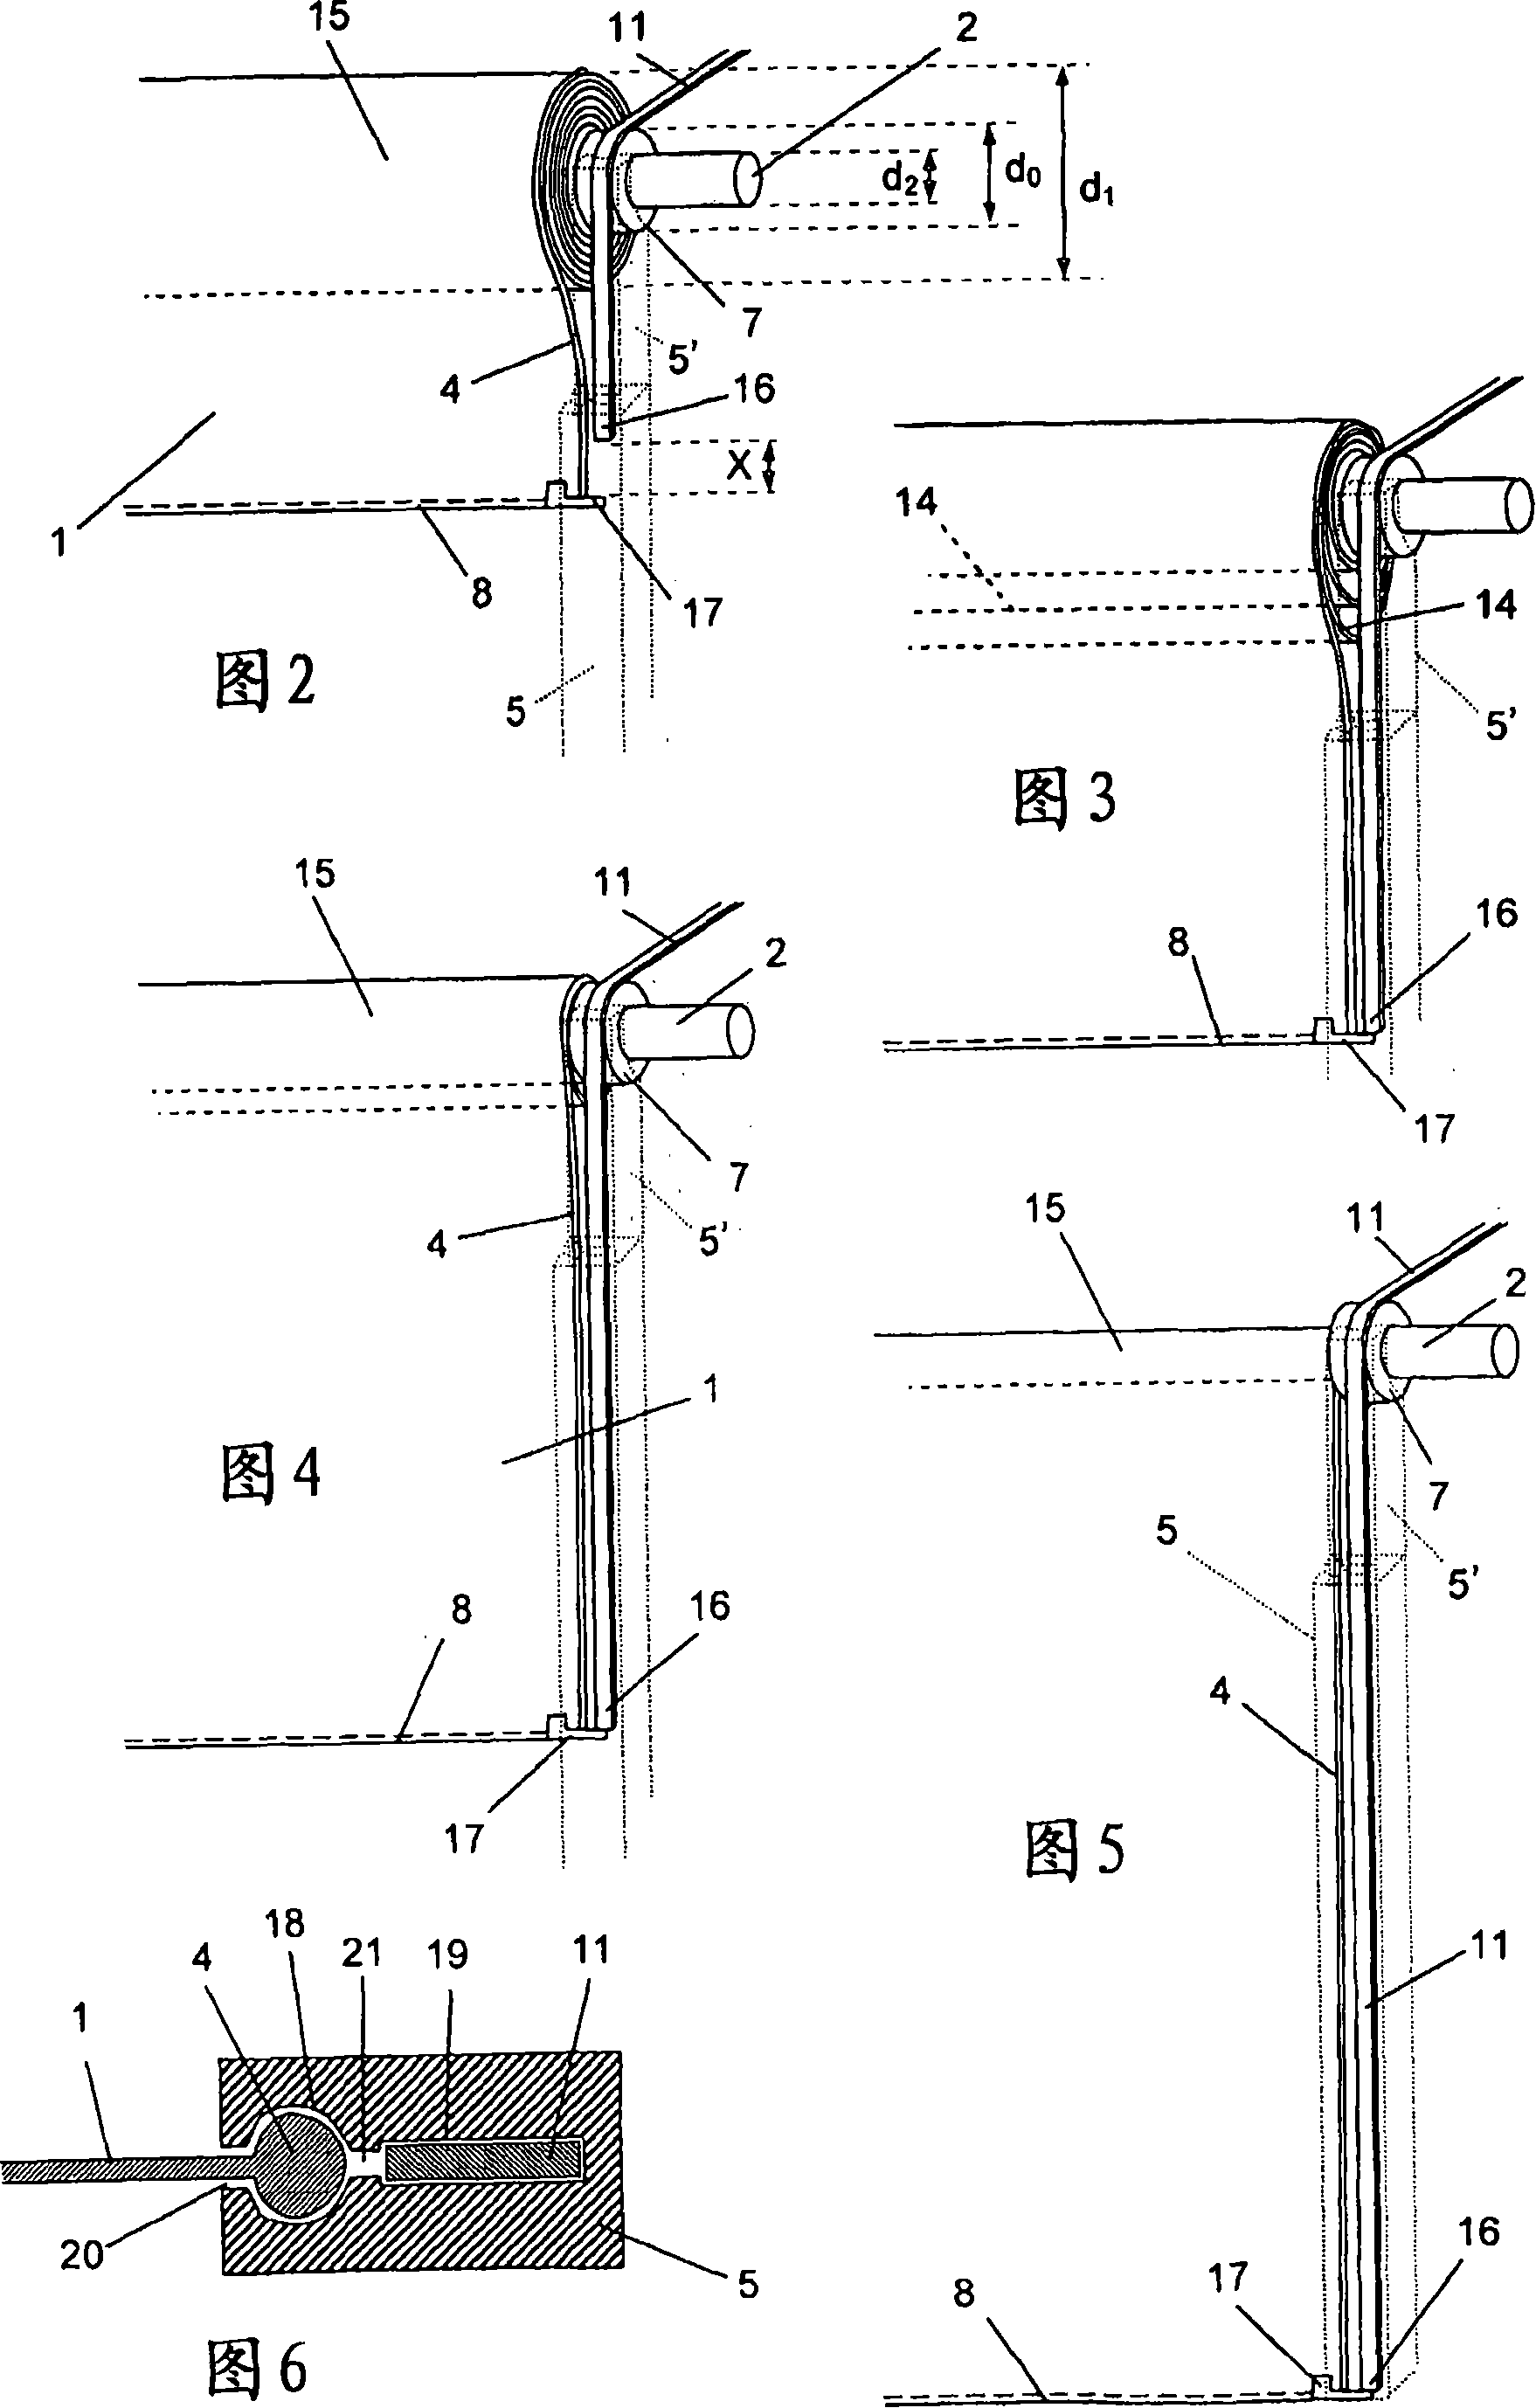 Roller curtain device